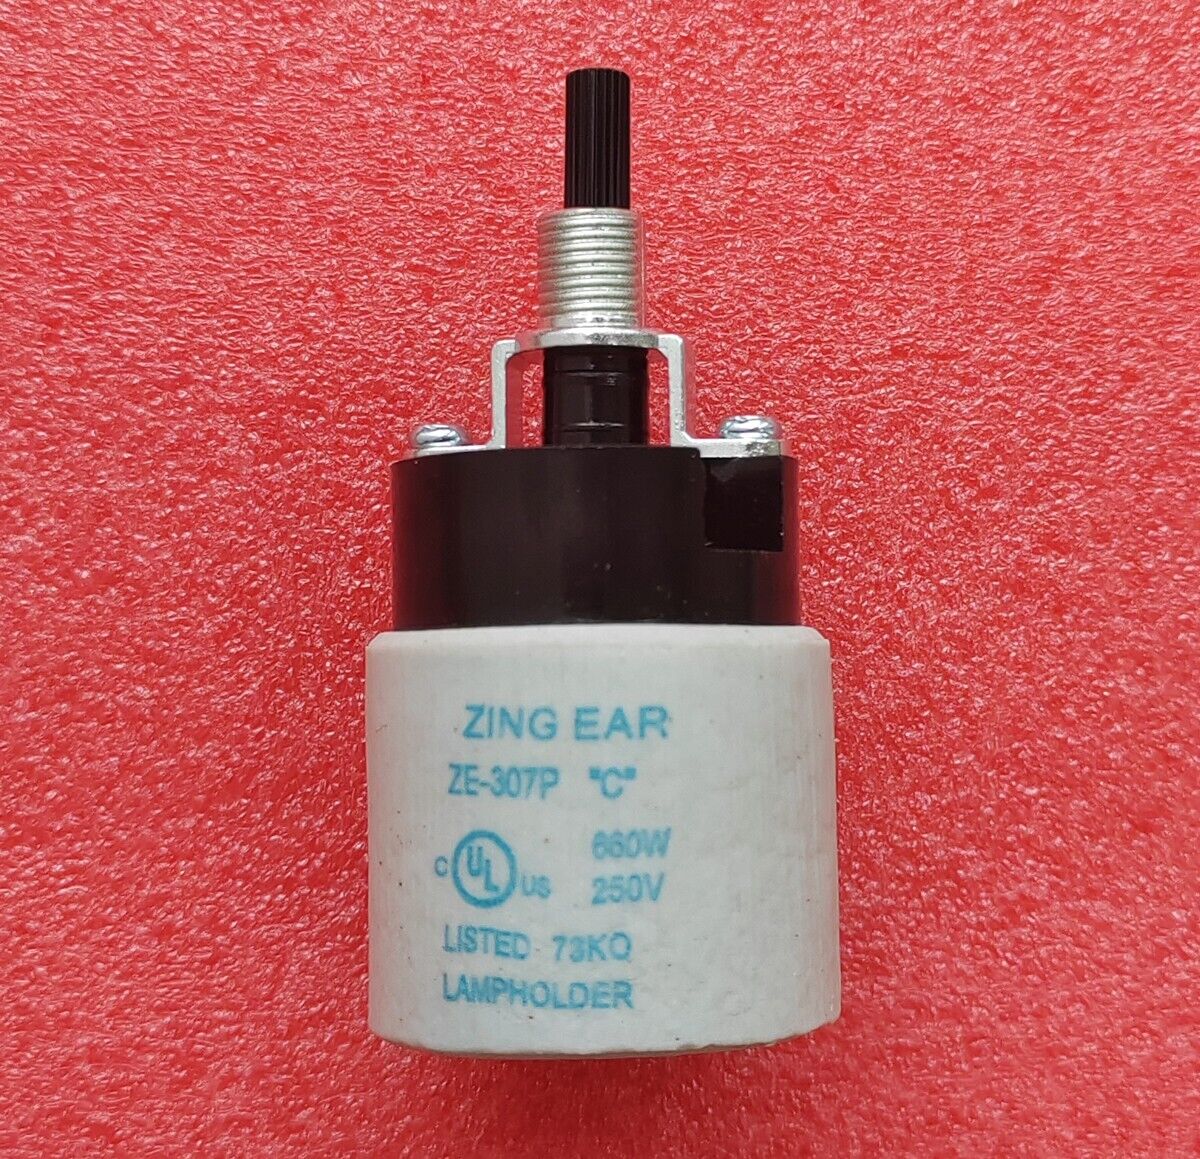 ZE-307P Turn Knob Rotary Bulb Lamp Socket Replacement Switch E26 E27 - On Off